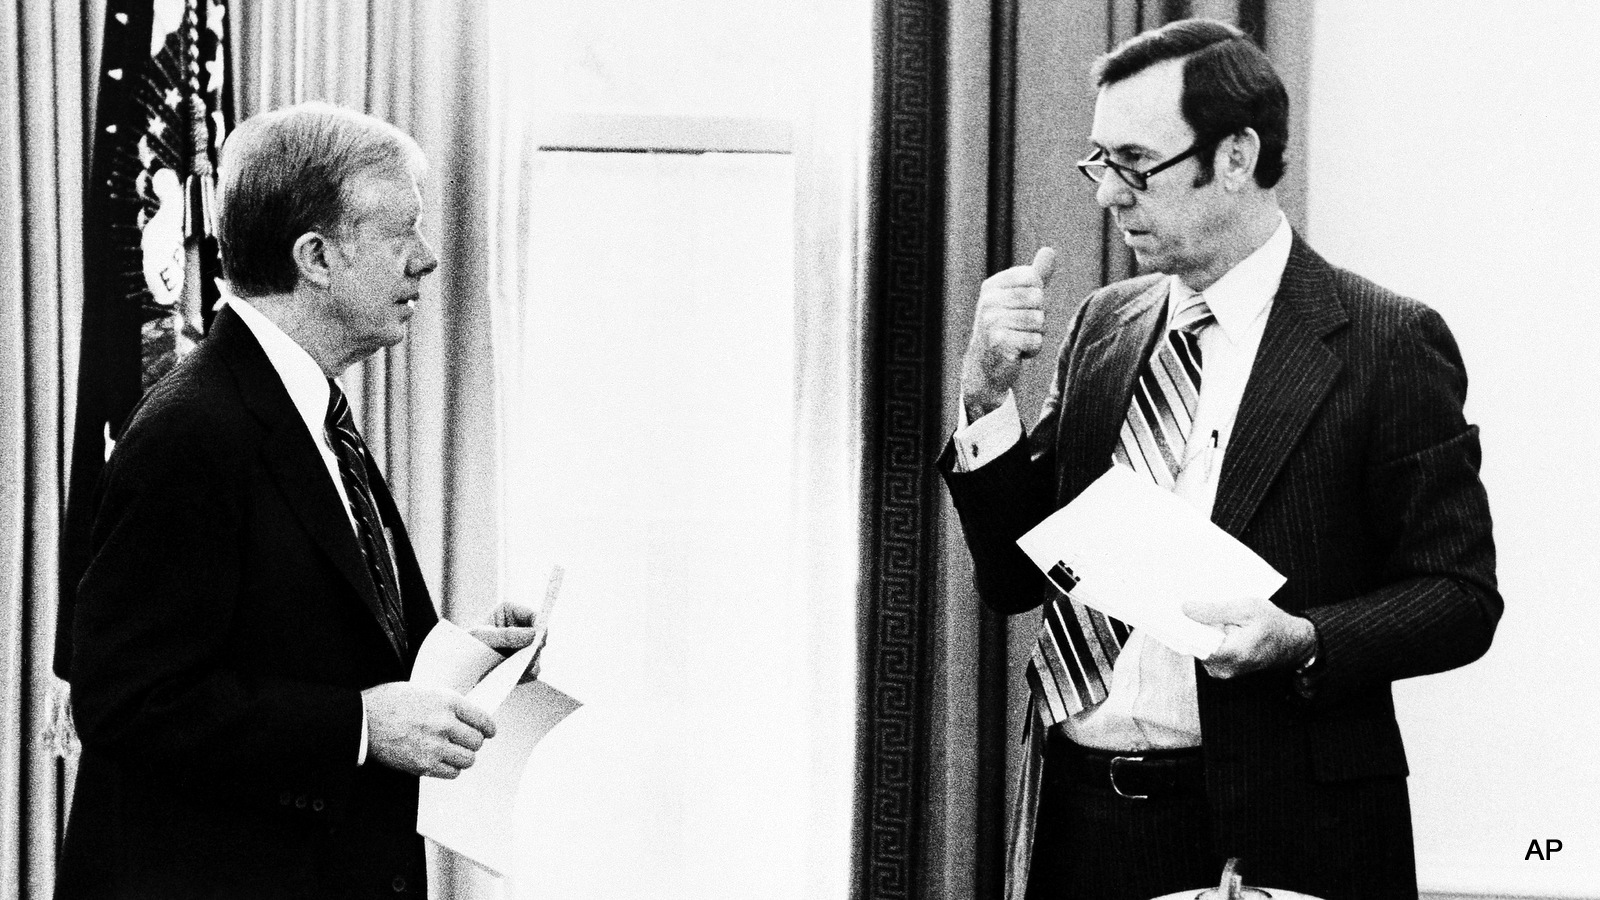 President Carter gets a last minute briefing by Gary Sick, right, an Iranian expert, in the Oval Office at the White House on Tuesday, Jan. 20, 1981 in Washington on the latest on the release of American Hostage held in Iran. (AP Photo/POOL)